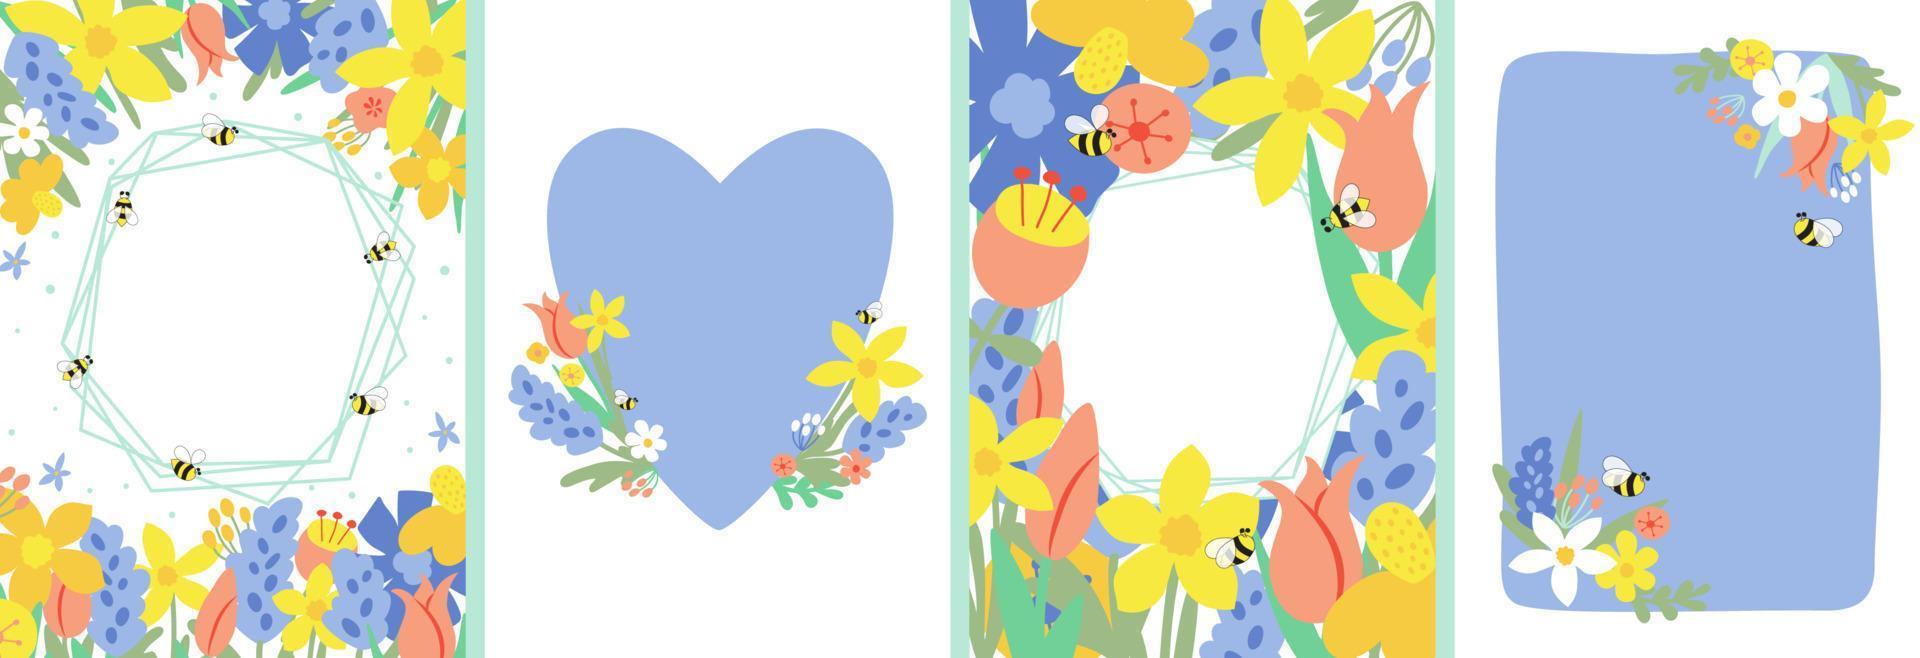 Floral spring posters set, wallpapers, frame, covers, cards. Spring flowers, honey bees, leaves, hand drawn floral bouquets, flower compositions. Mothers day cards Vector illustration collection.